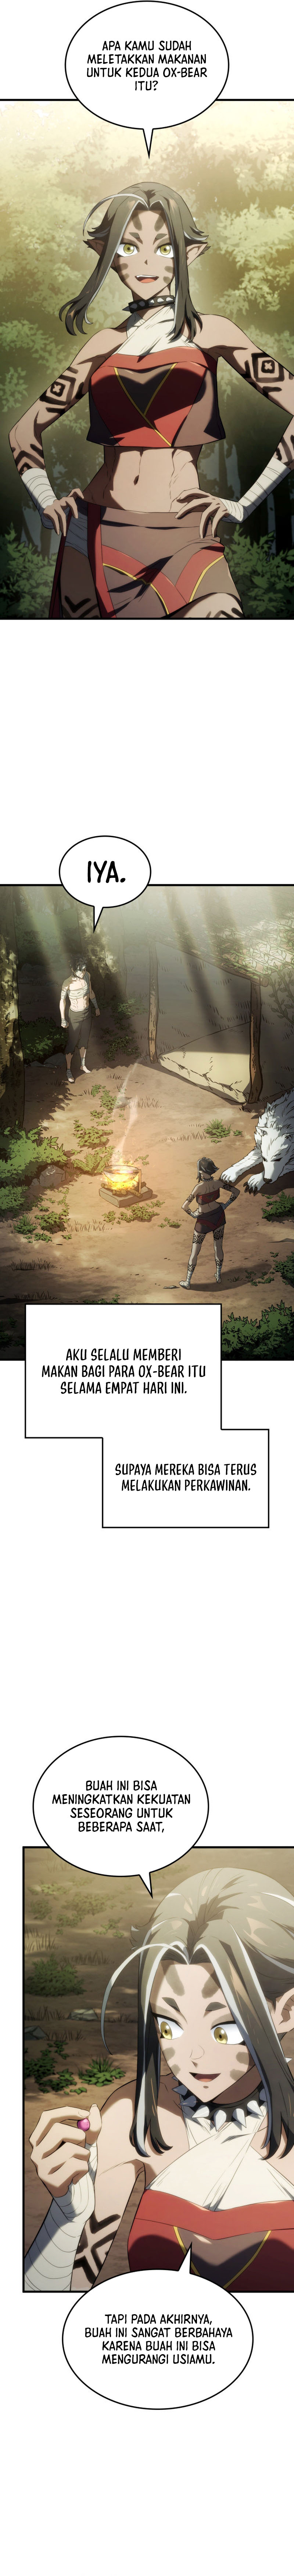 id-revenge-of-the-iron-blooded-sword-hound Chapter 35